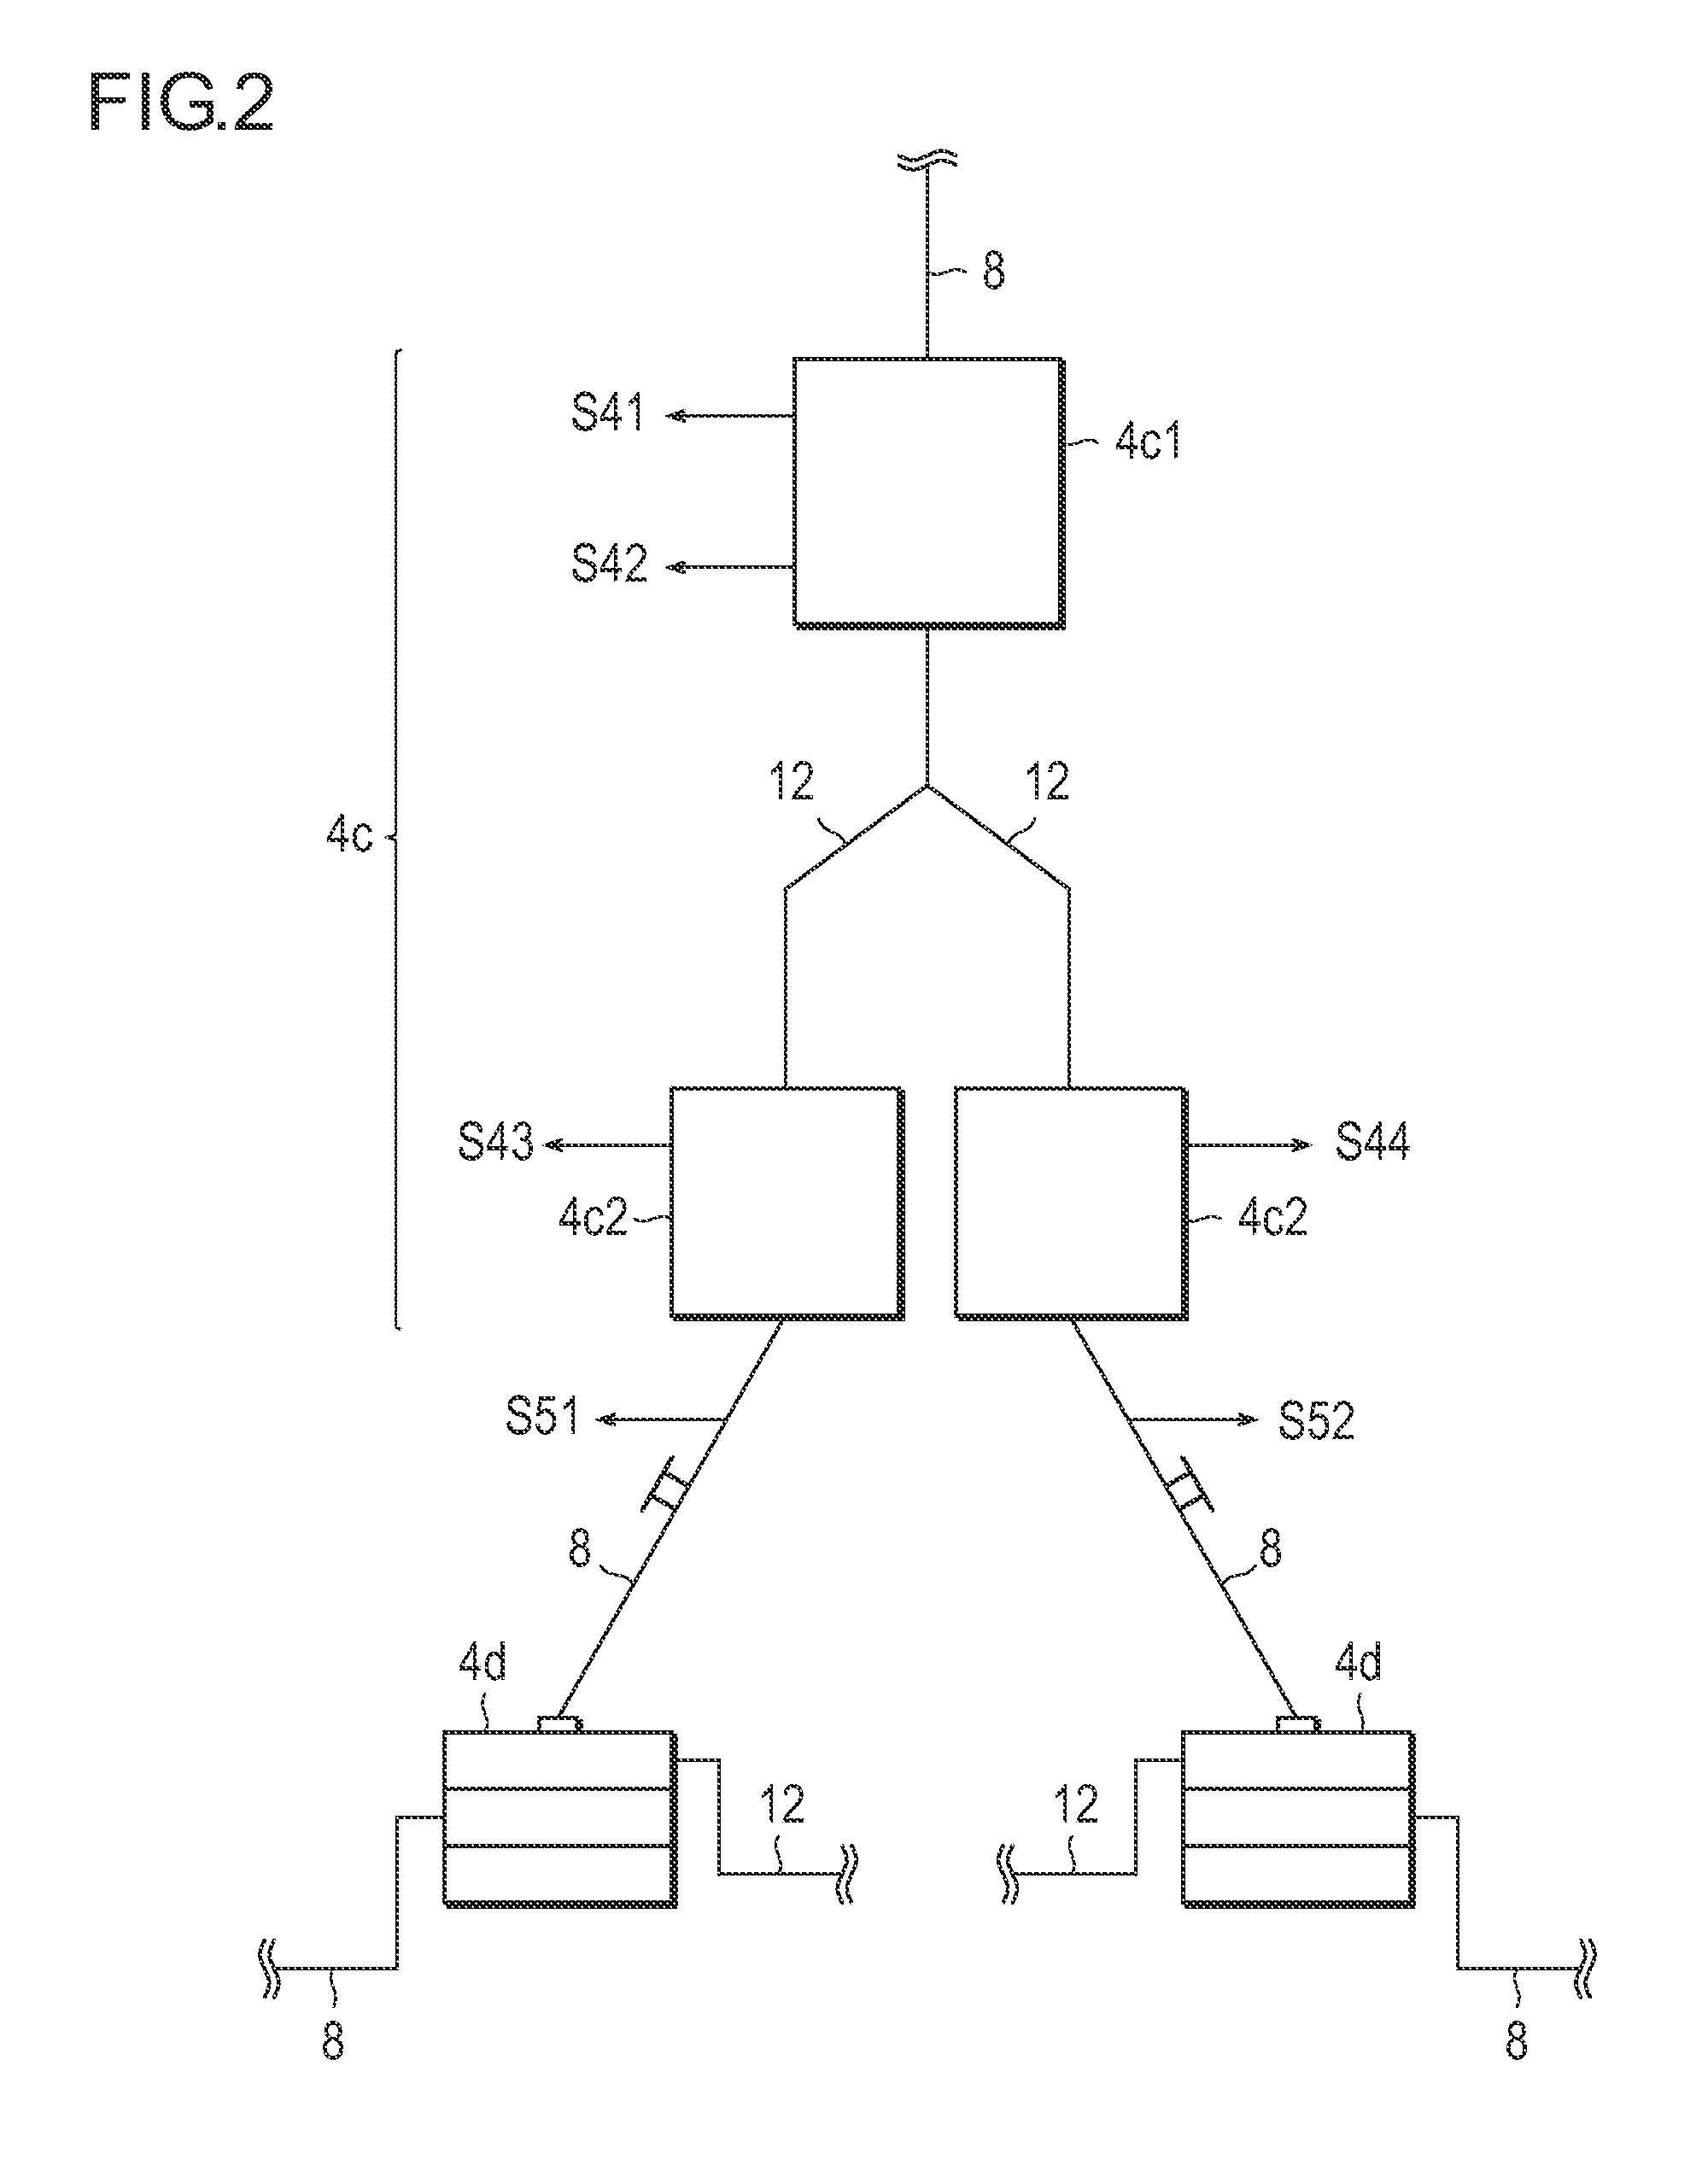 Method for producing particulate water - absorbing agent composed principally of water absorbing resin